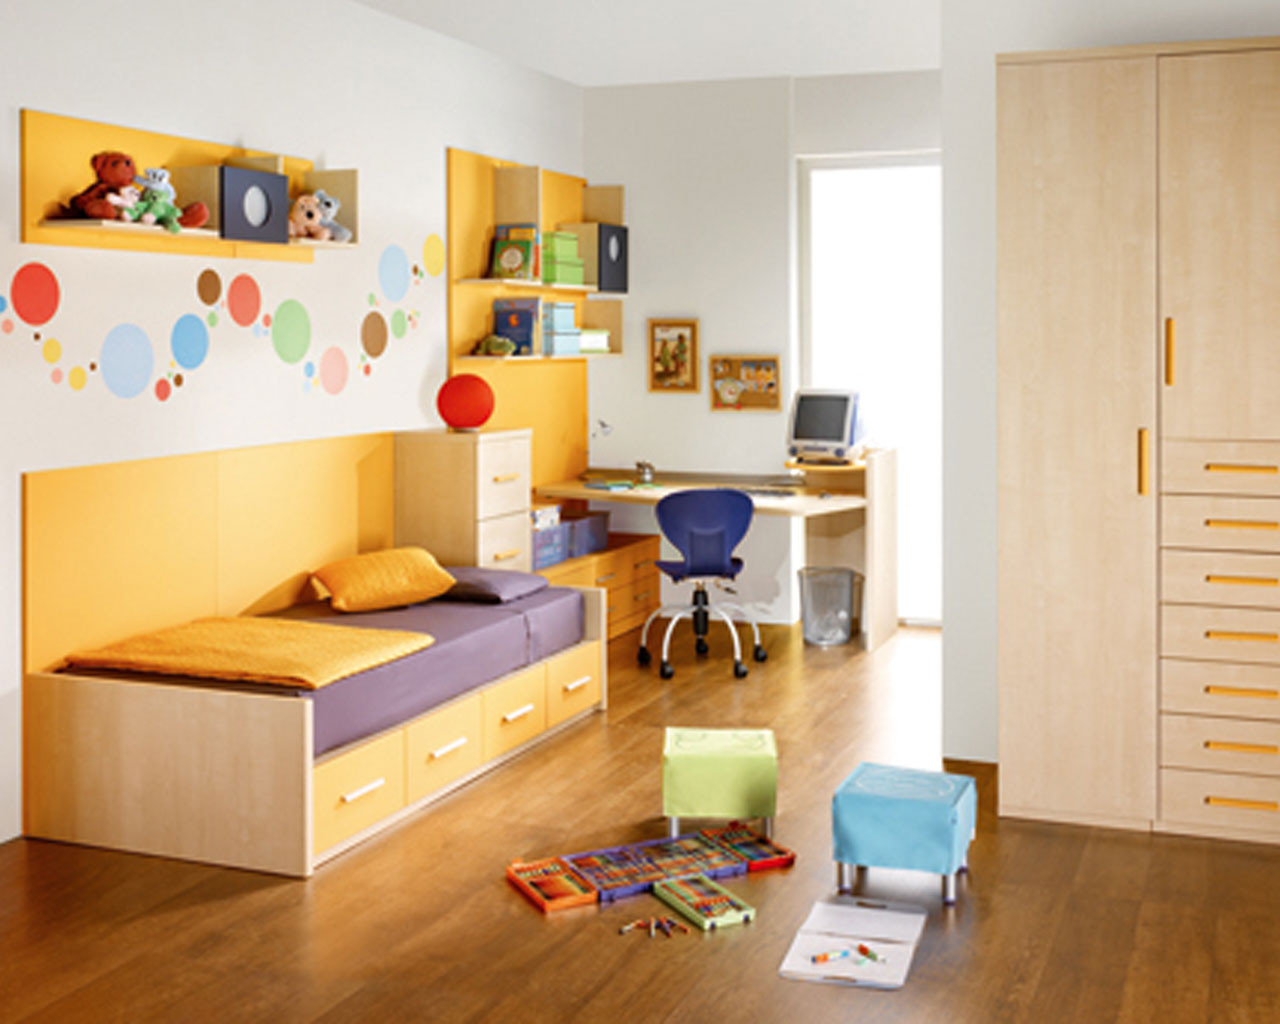 Kids Room Design
 Kids Room Decor and Design Ideas as the Easy yet Effective